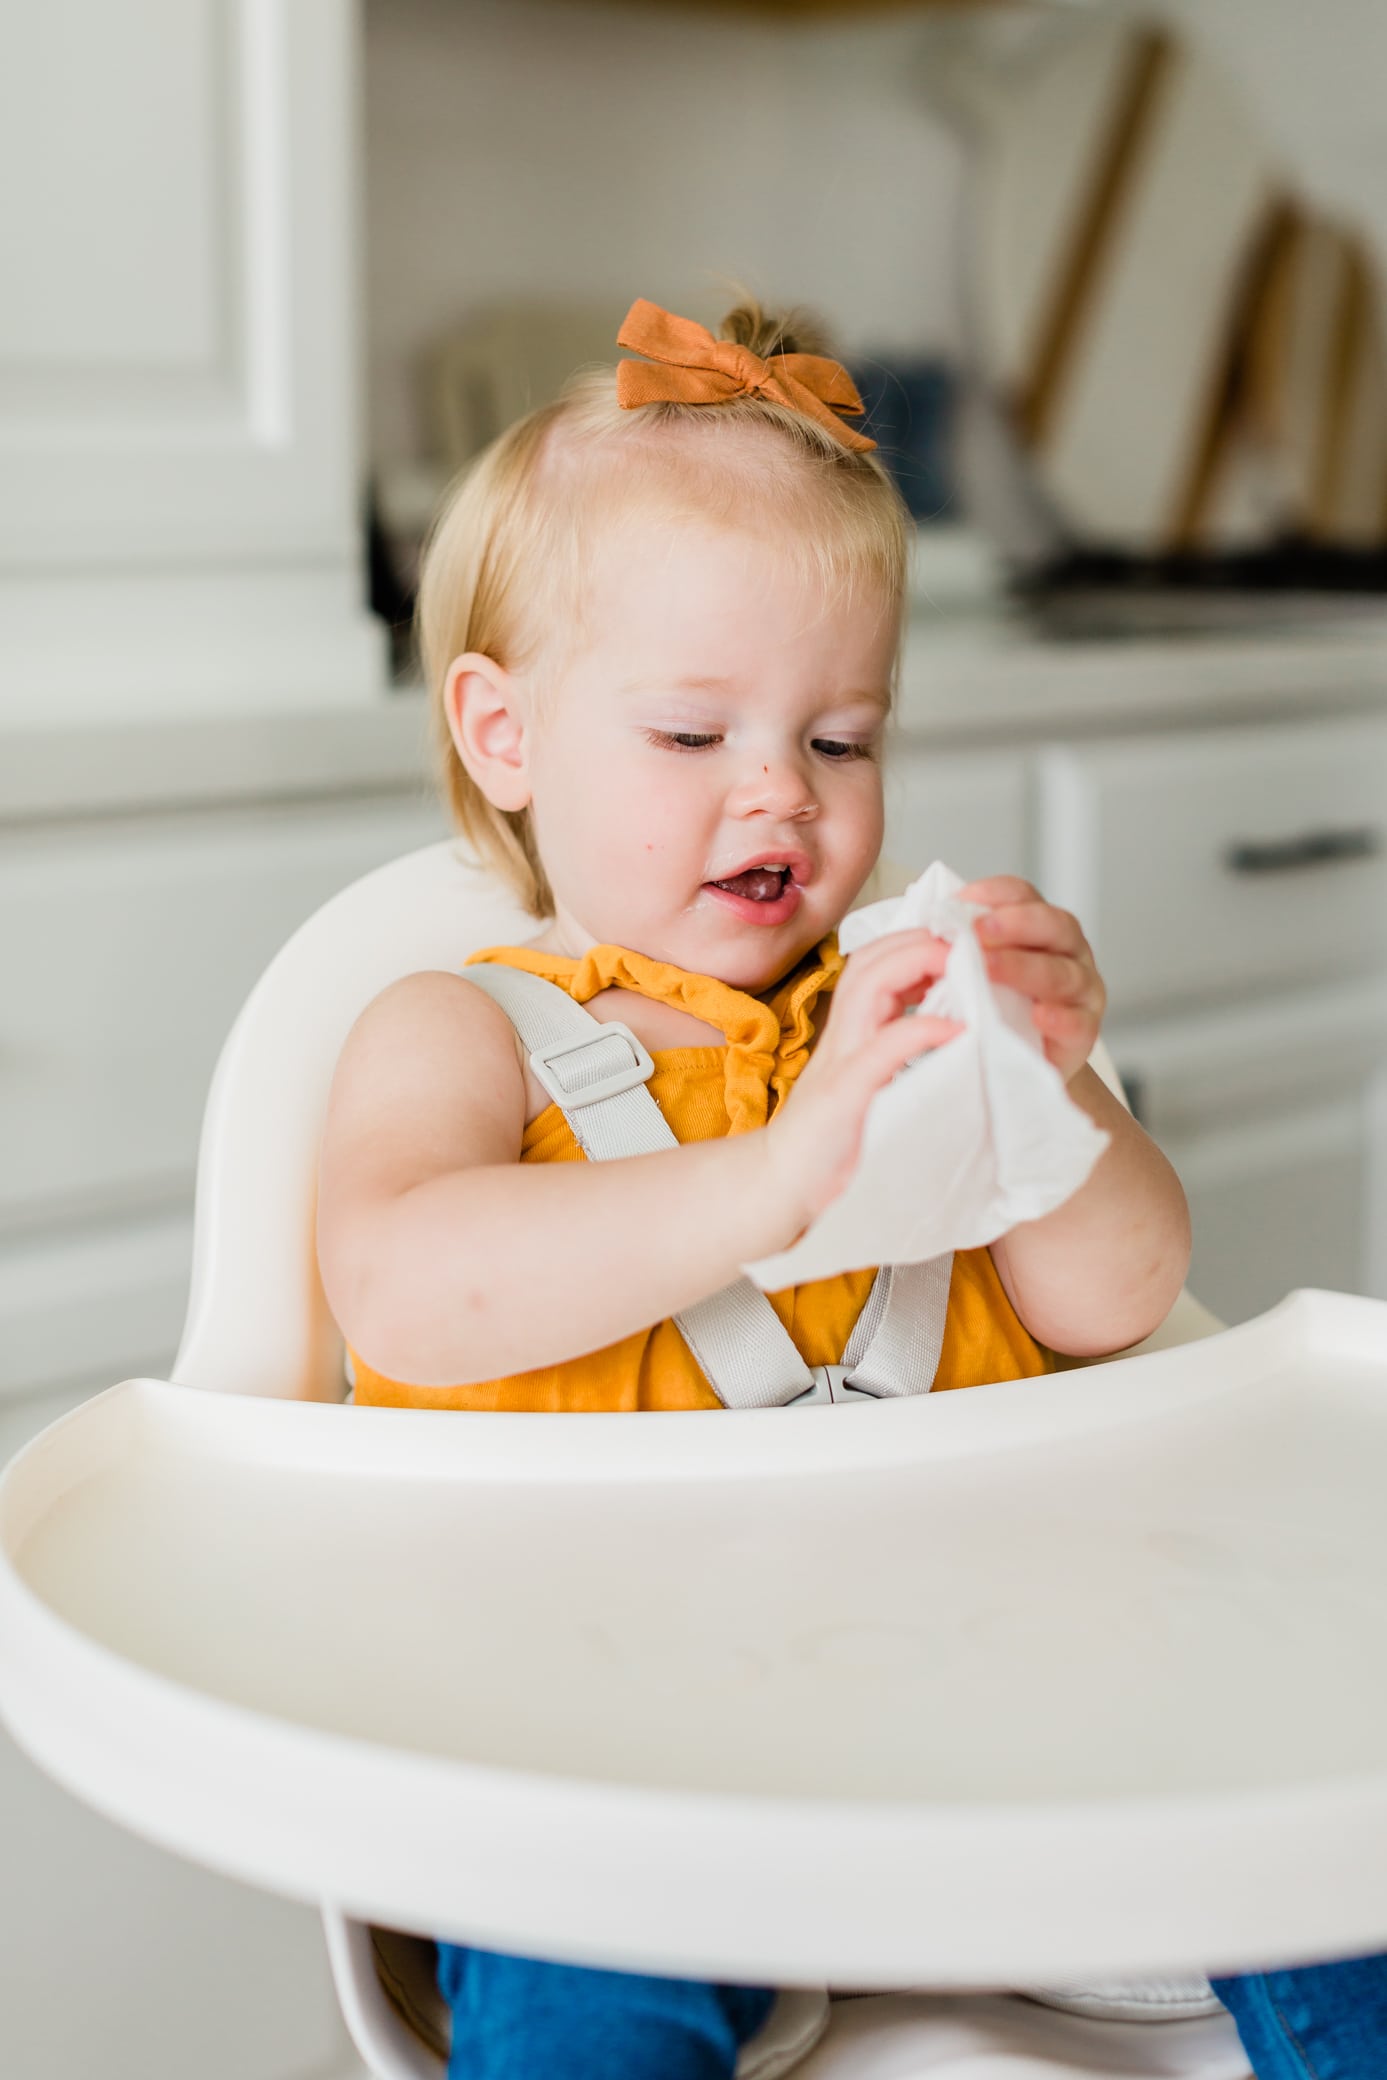 Young toddler girl sitting in her high chair holding a wipe cleaning her hands and her high chair tray.